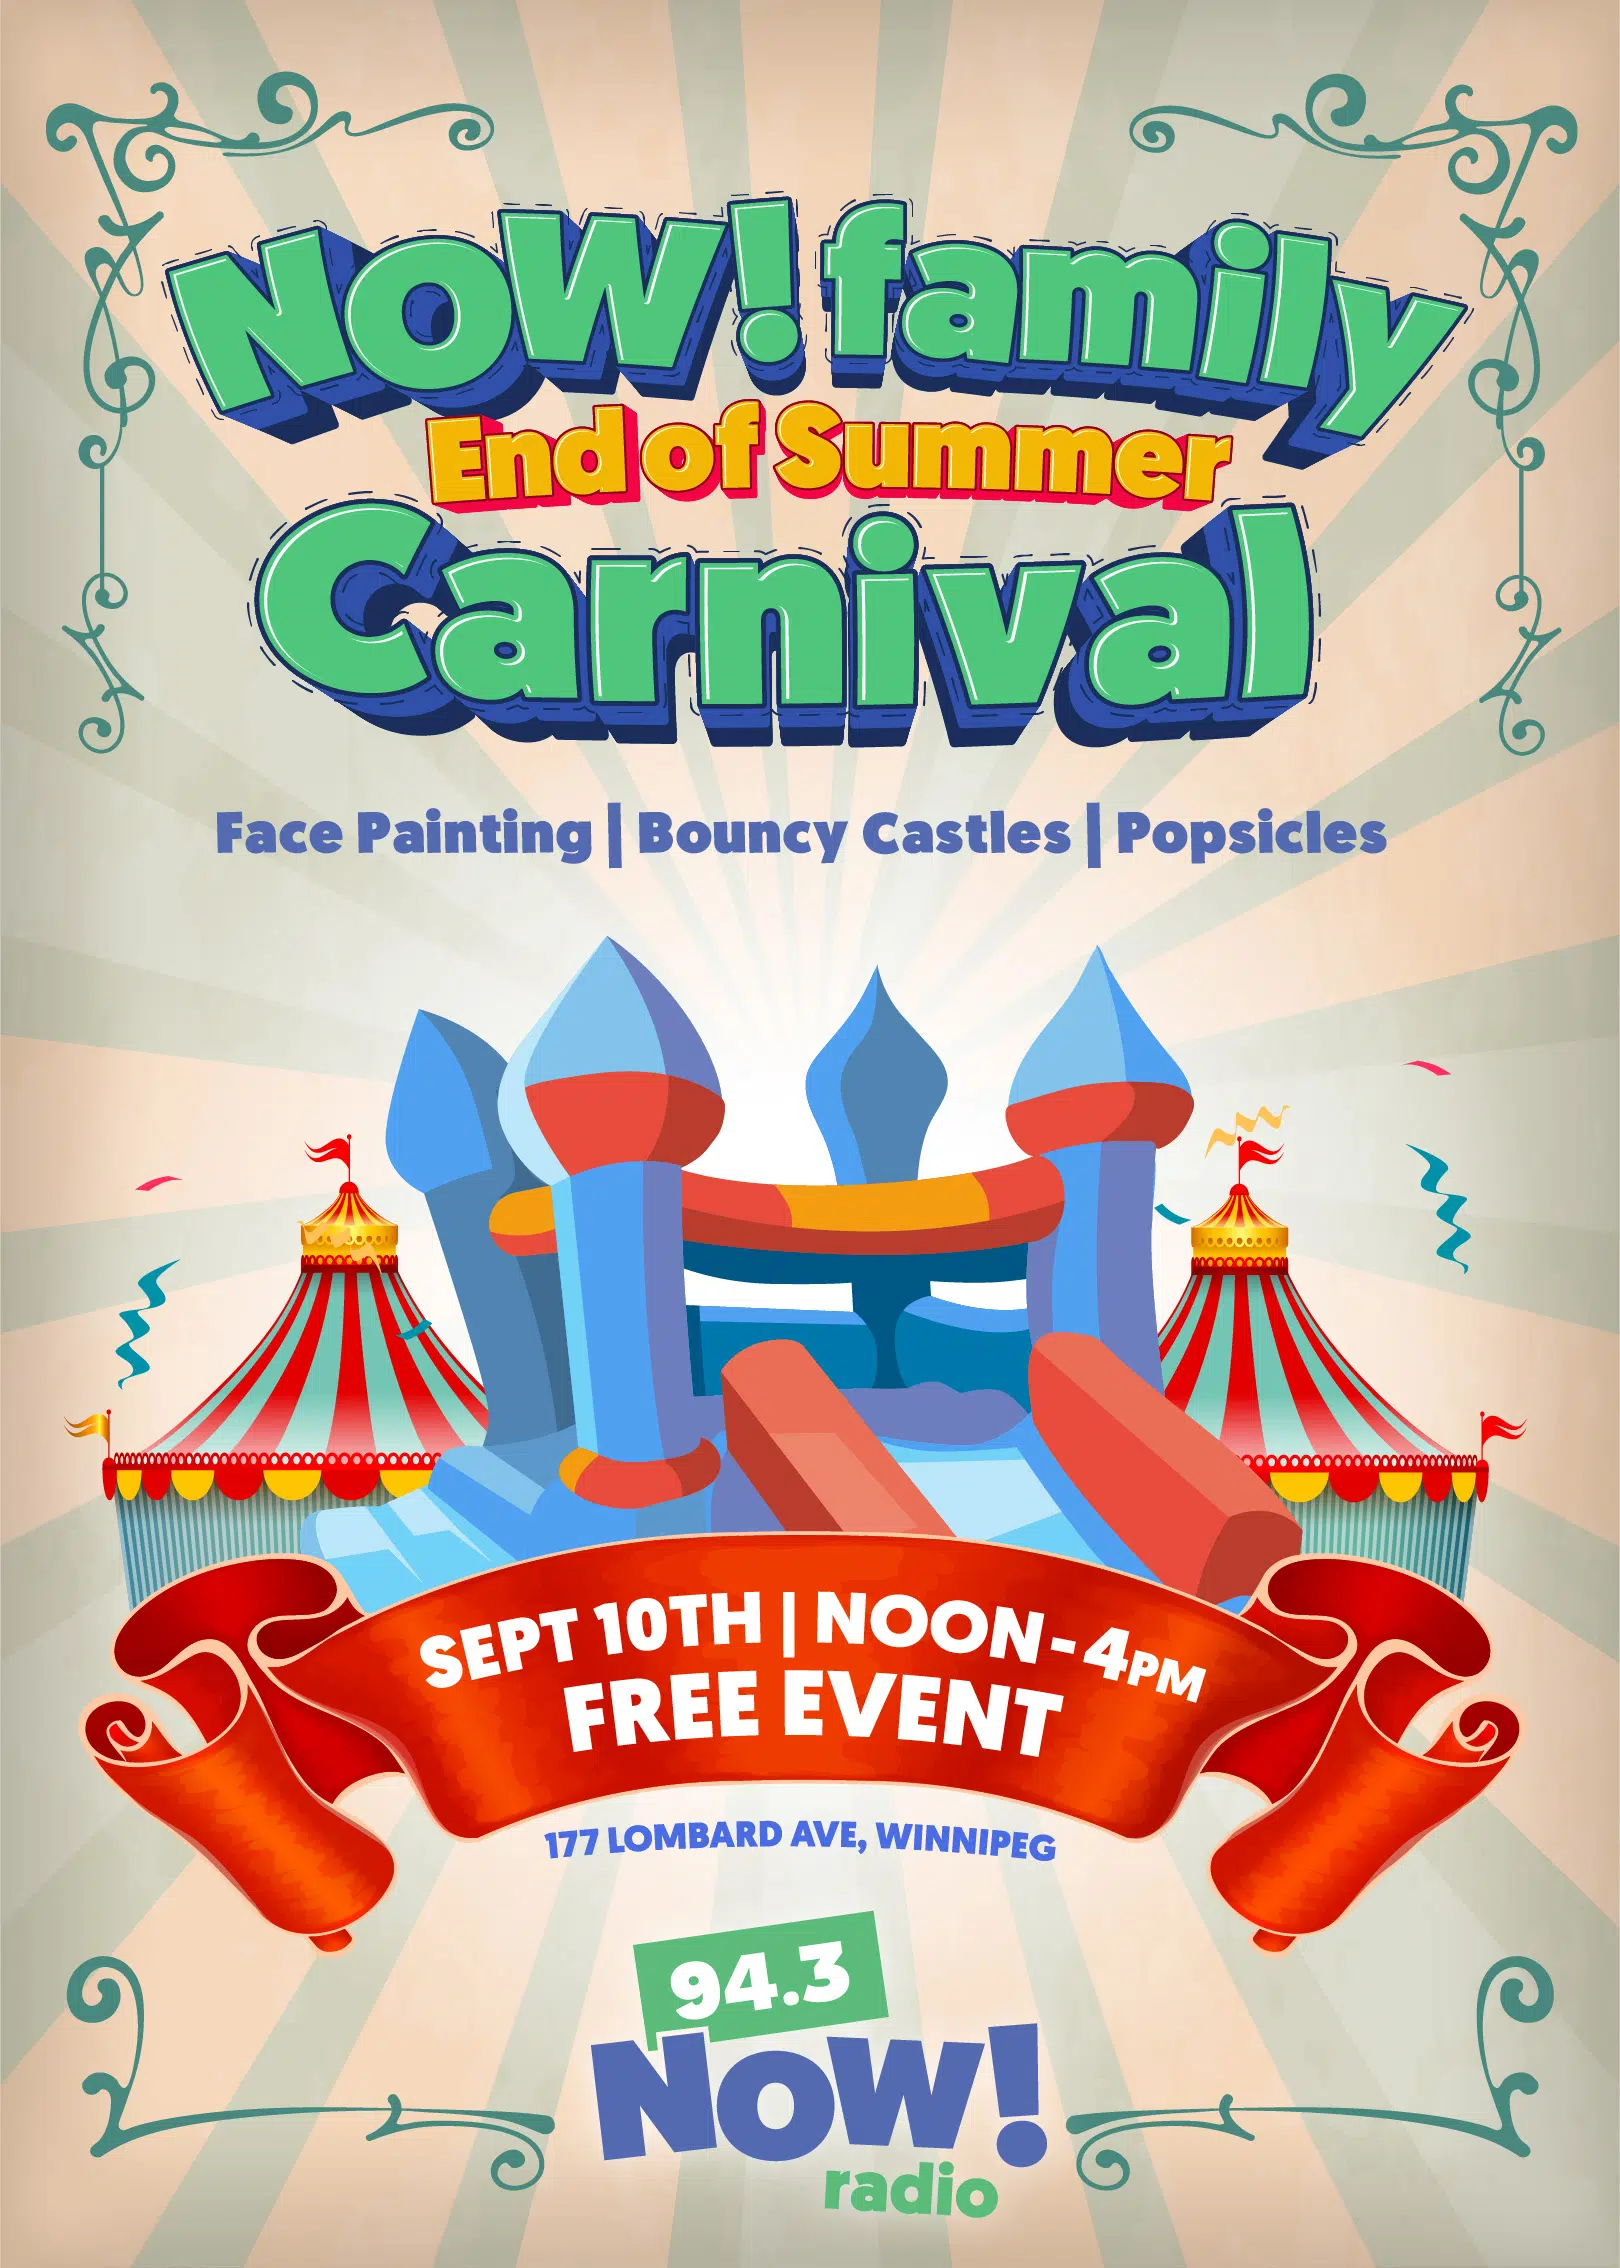 NOW! Family End of Summer Carnival